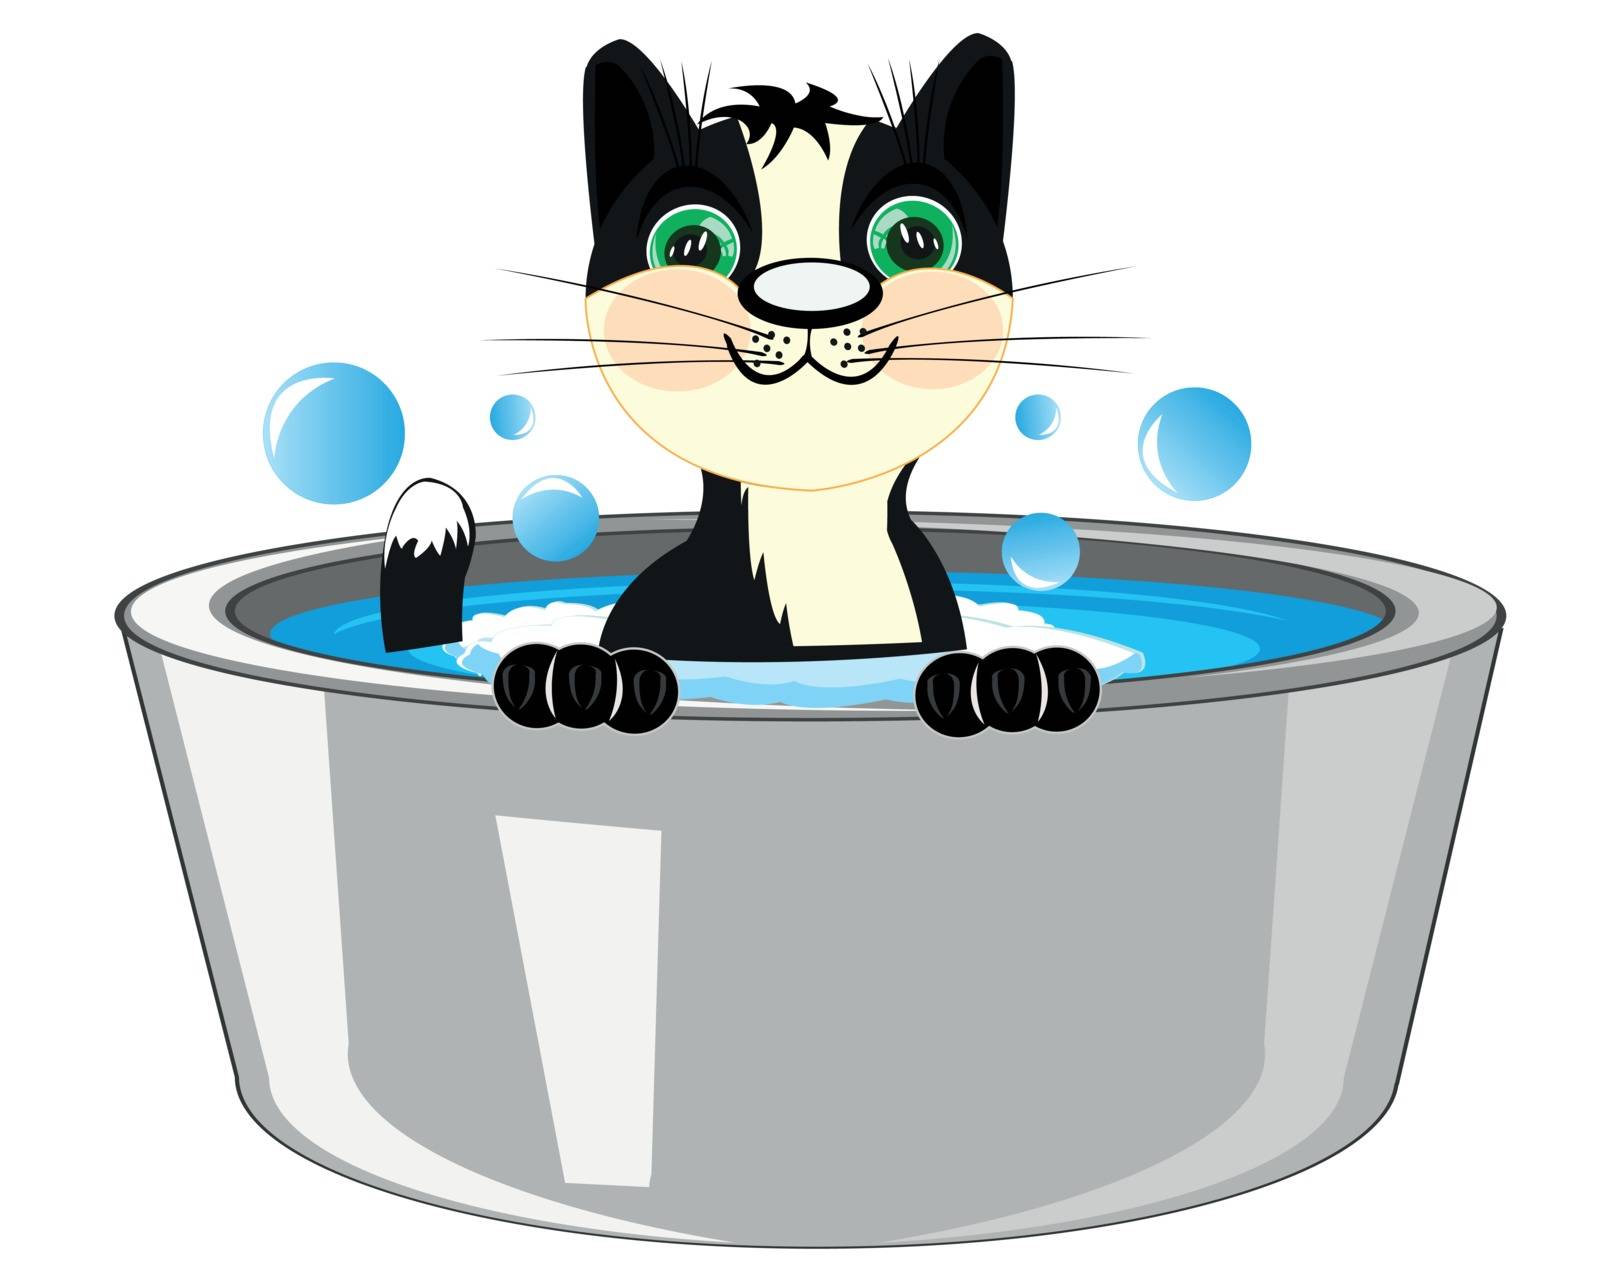 Black cat in capacities with water is washed